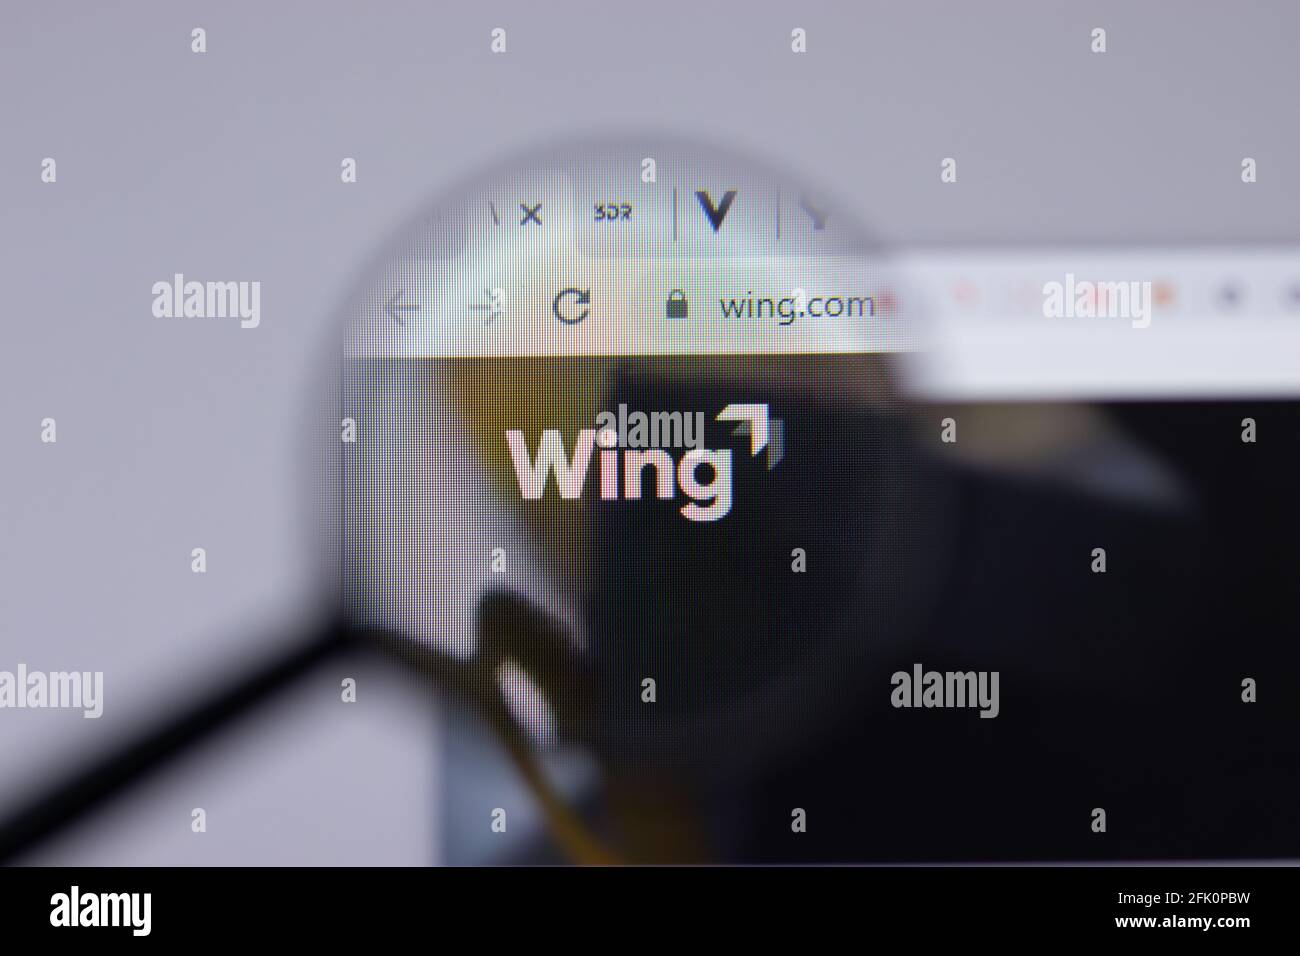 New York, USA - 26 April 2021: Wing logo close-up on website page, Illustrative Editorial Stock Photo